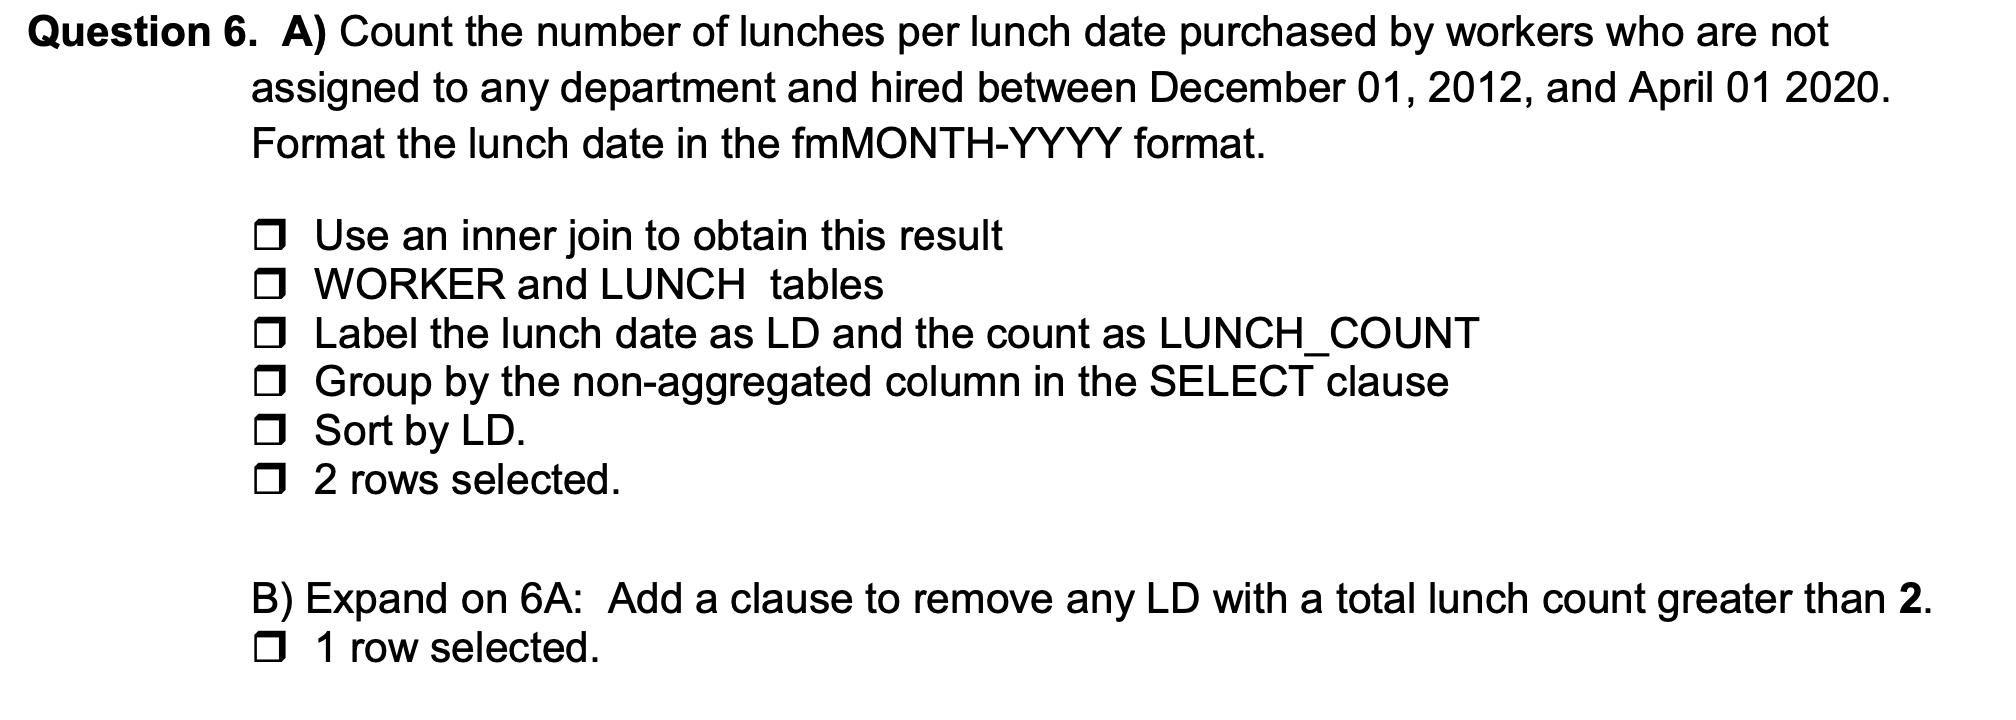 Question 6. A) Count the number of lunches per lunch date purchased by workers who are not assigned to any